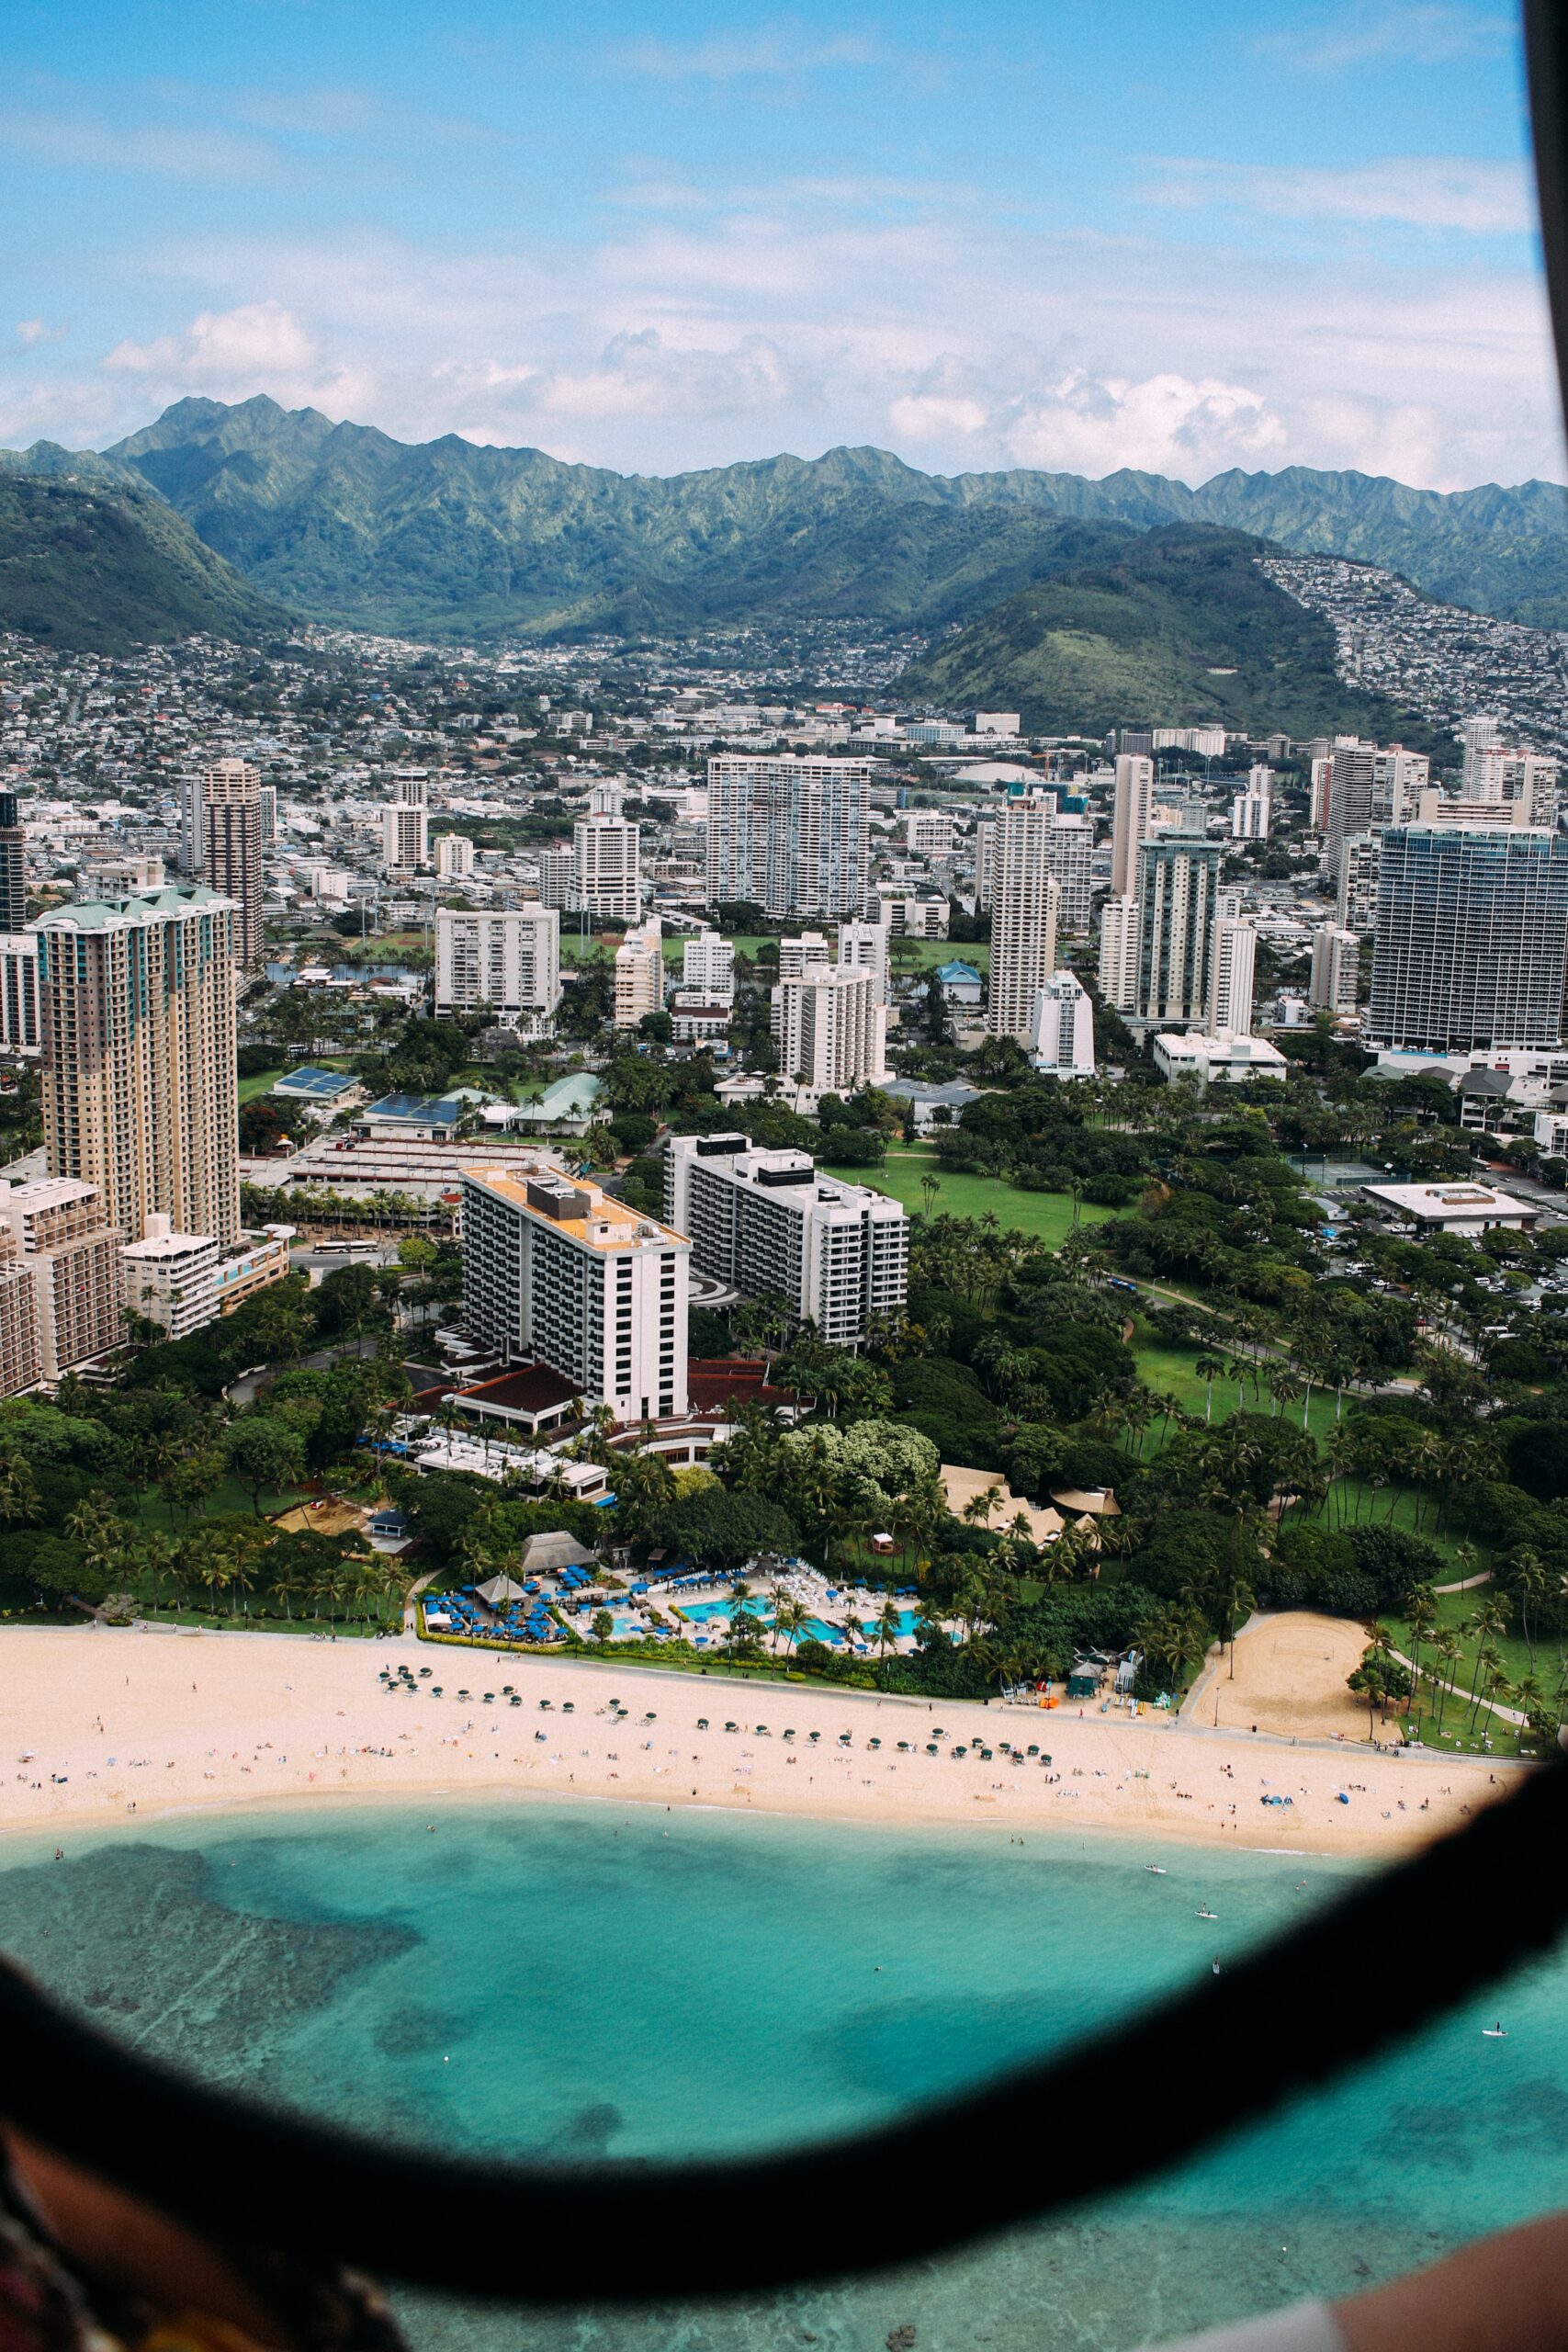 How To Enjoy a Once-In-A-Lifetime Trip to Hawaii on a Budget